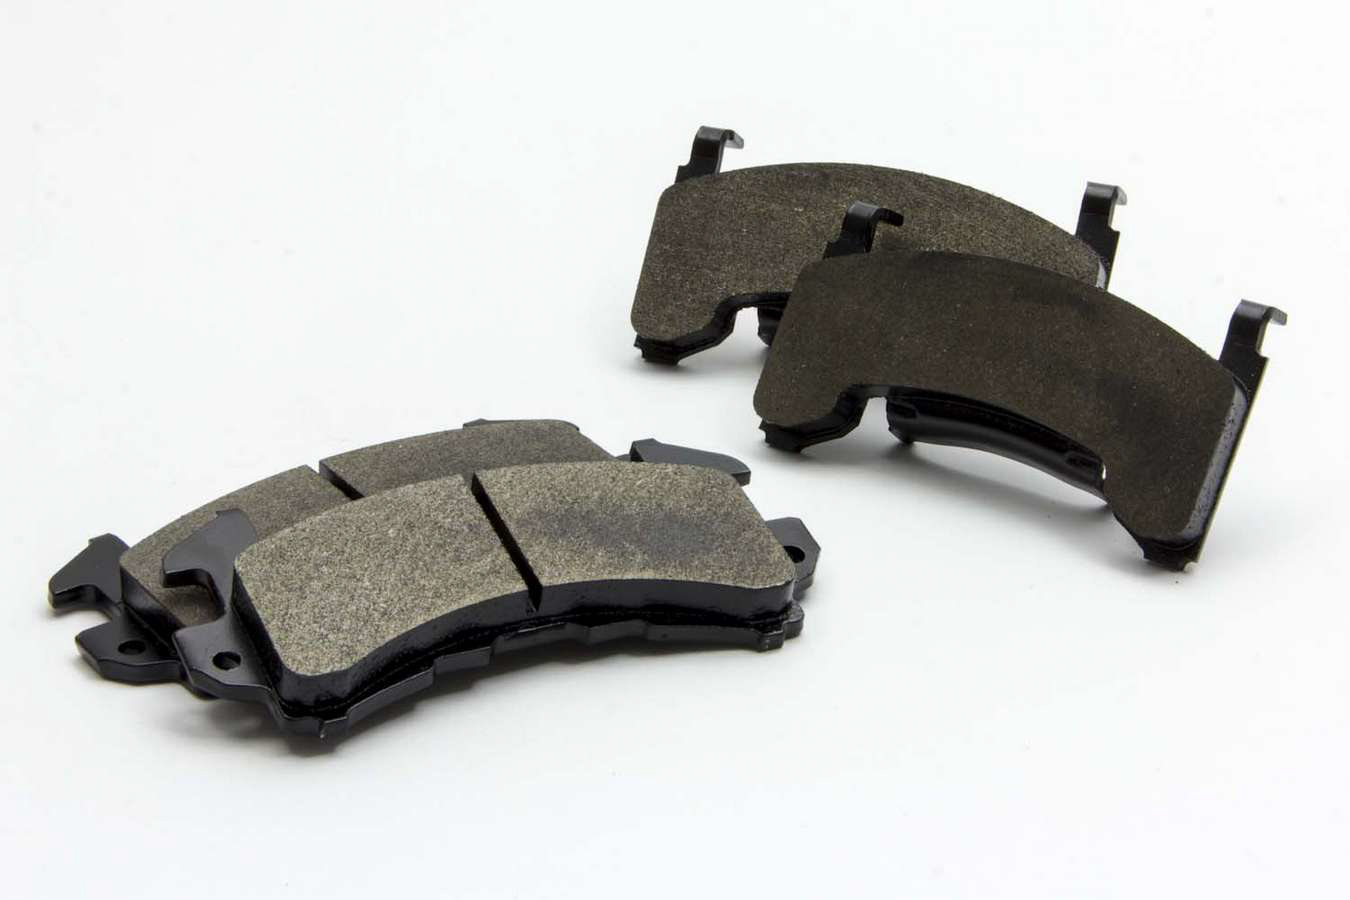 AFCO Racing Products 1251-2154 Brake Pads, C2 Compound, Medium-Low Temperature, GM Metric Calipers, Kit